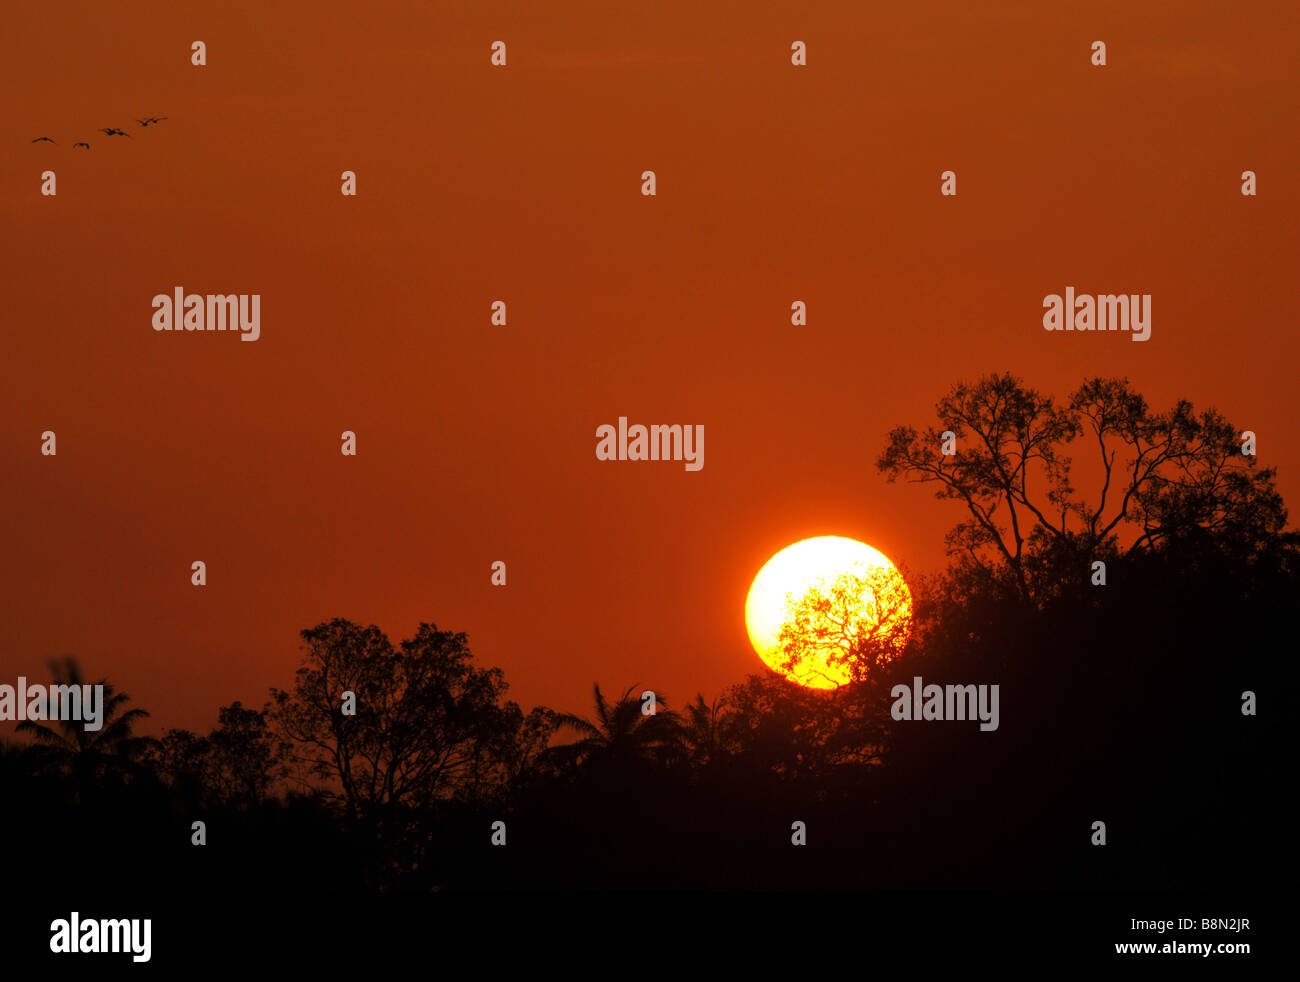 Sunrise in The Gambia, West Africa Stock Photo